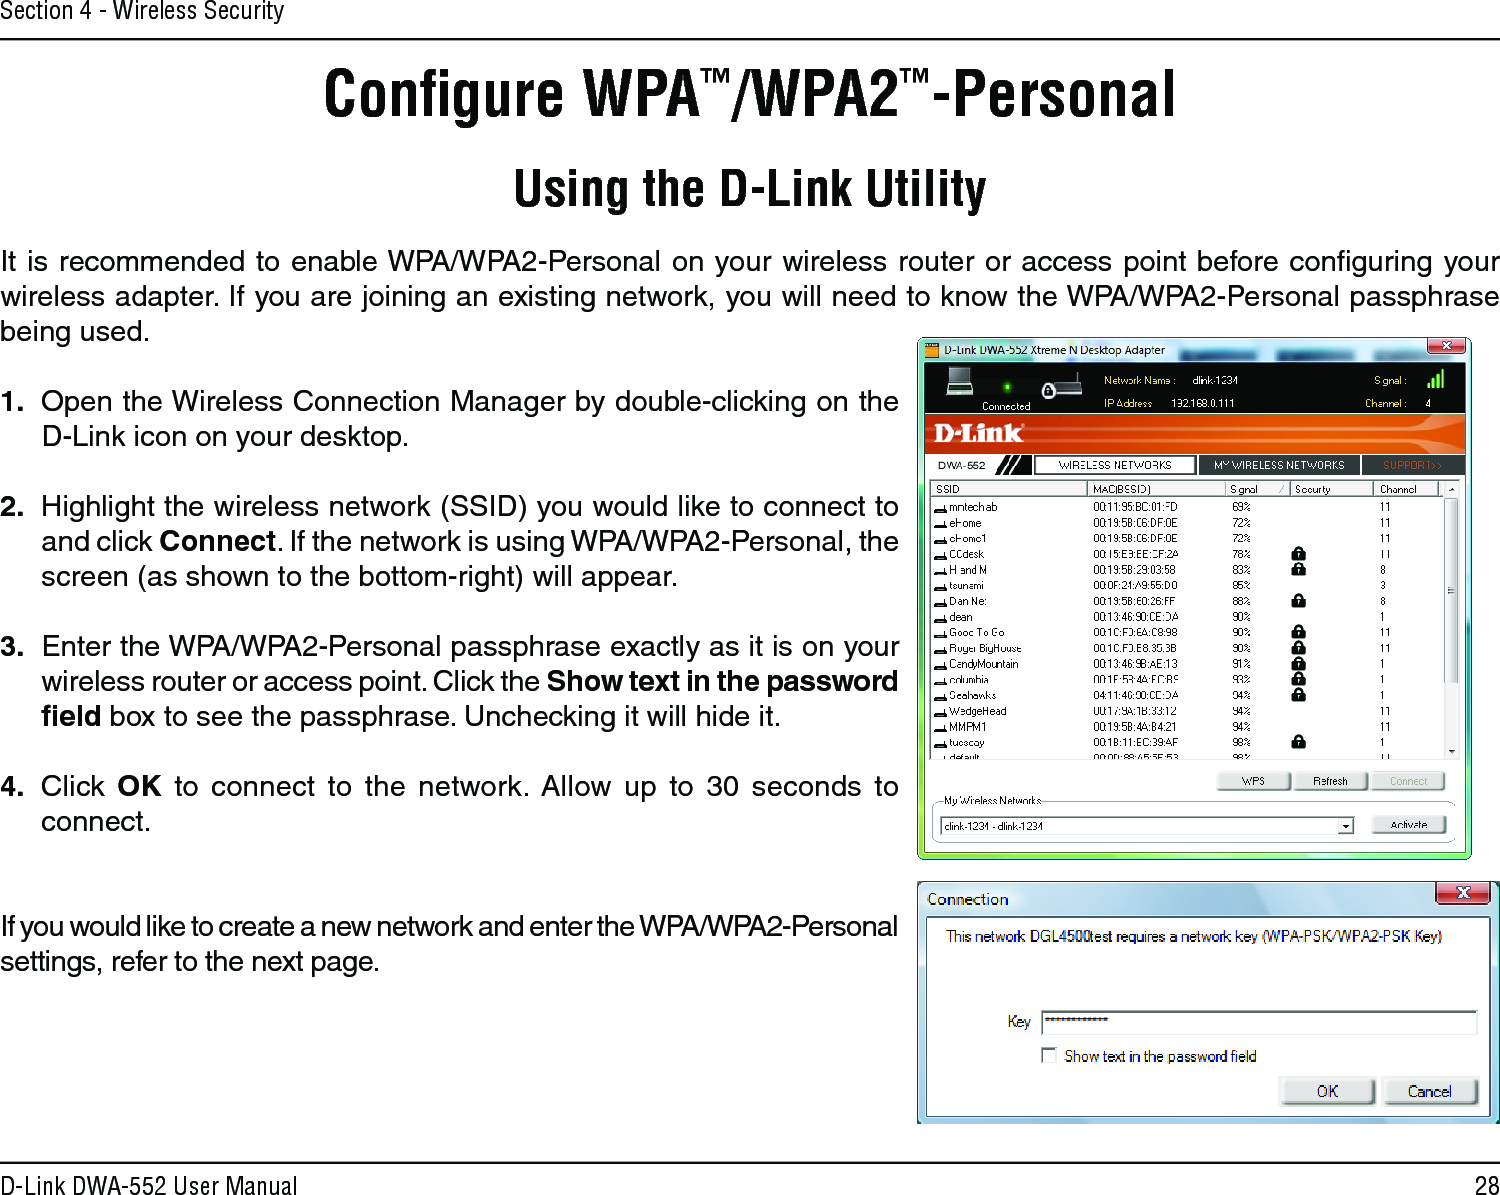 28D-Link DWA-552 User ManualSection 4 - Wireless SecurityConﬁgure WPA™/WPA2™-PersonalUsing the D-Link UtilityIt is recommended to enable WPA/WPA2-Personal on your wireless router or access point before conﬁguring your wireless adapter. If you are joining an existing network, you will need to know the WPA/WPA2-Personal passphrase being used.1.  Open the Wireless Connection Manager by double-clicking on the D-Link icon on your desktop. 2.  Highlight the wireless network (SSID) you would like to connect to and click Connect. If the network is using WPA/WPA2-Personal, the screen (as shown to the bottom-right) will appear. 3.  Enter the WPA/WPA2-Personal passphrase exactly as it is on your wireless router or access point. Click the Show text in the password ﬁeld box to see the passphrase. Unchecking it will hide it.4.  Click  OK  to  connect  to  the  network.  Allow  up  to  30  seconds  to connect.If you would like to create a new network and enter the WPA/WPA2-Personal settings, refer to the next page.